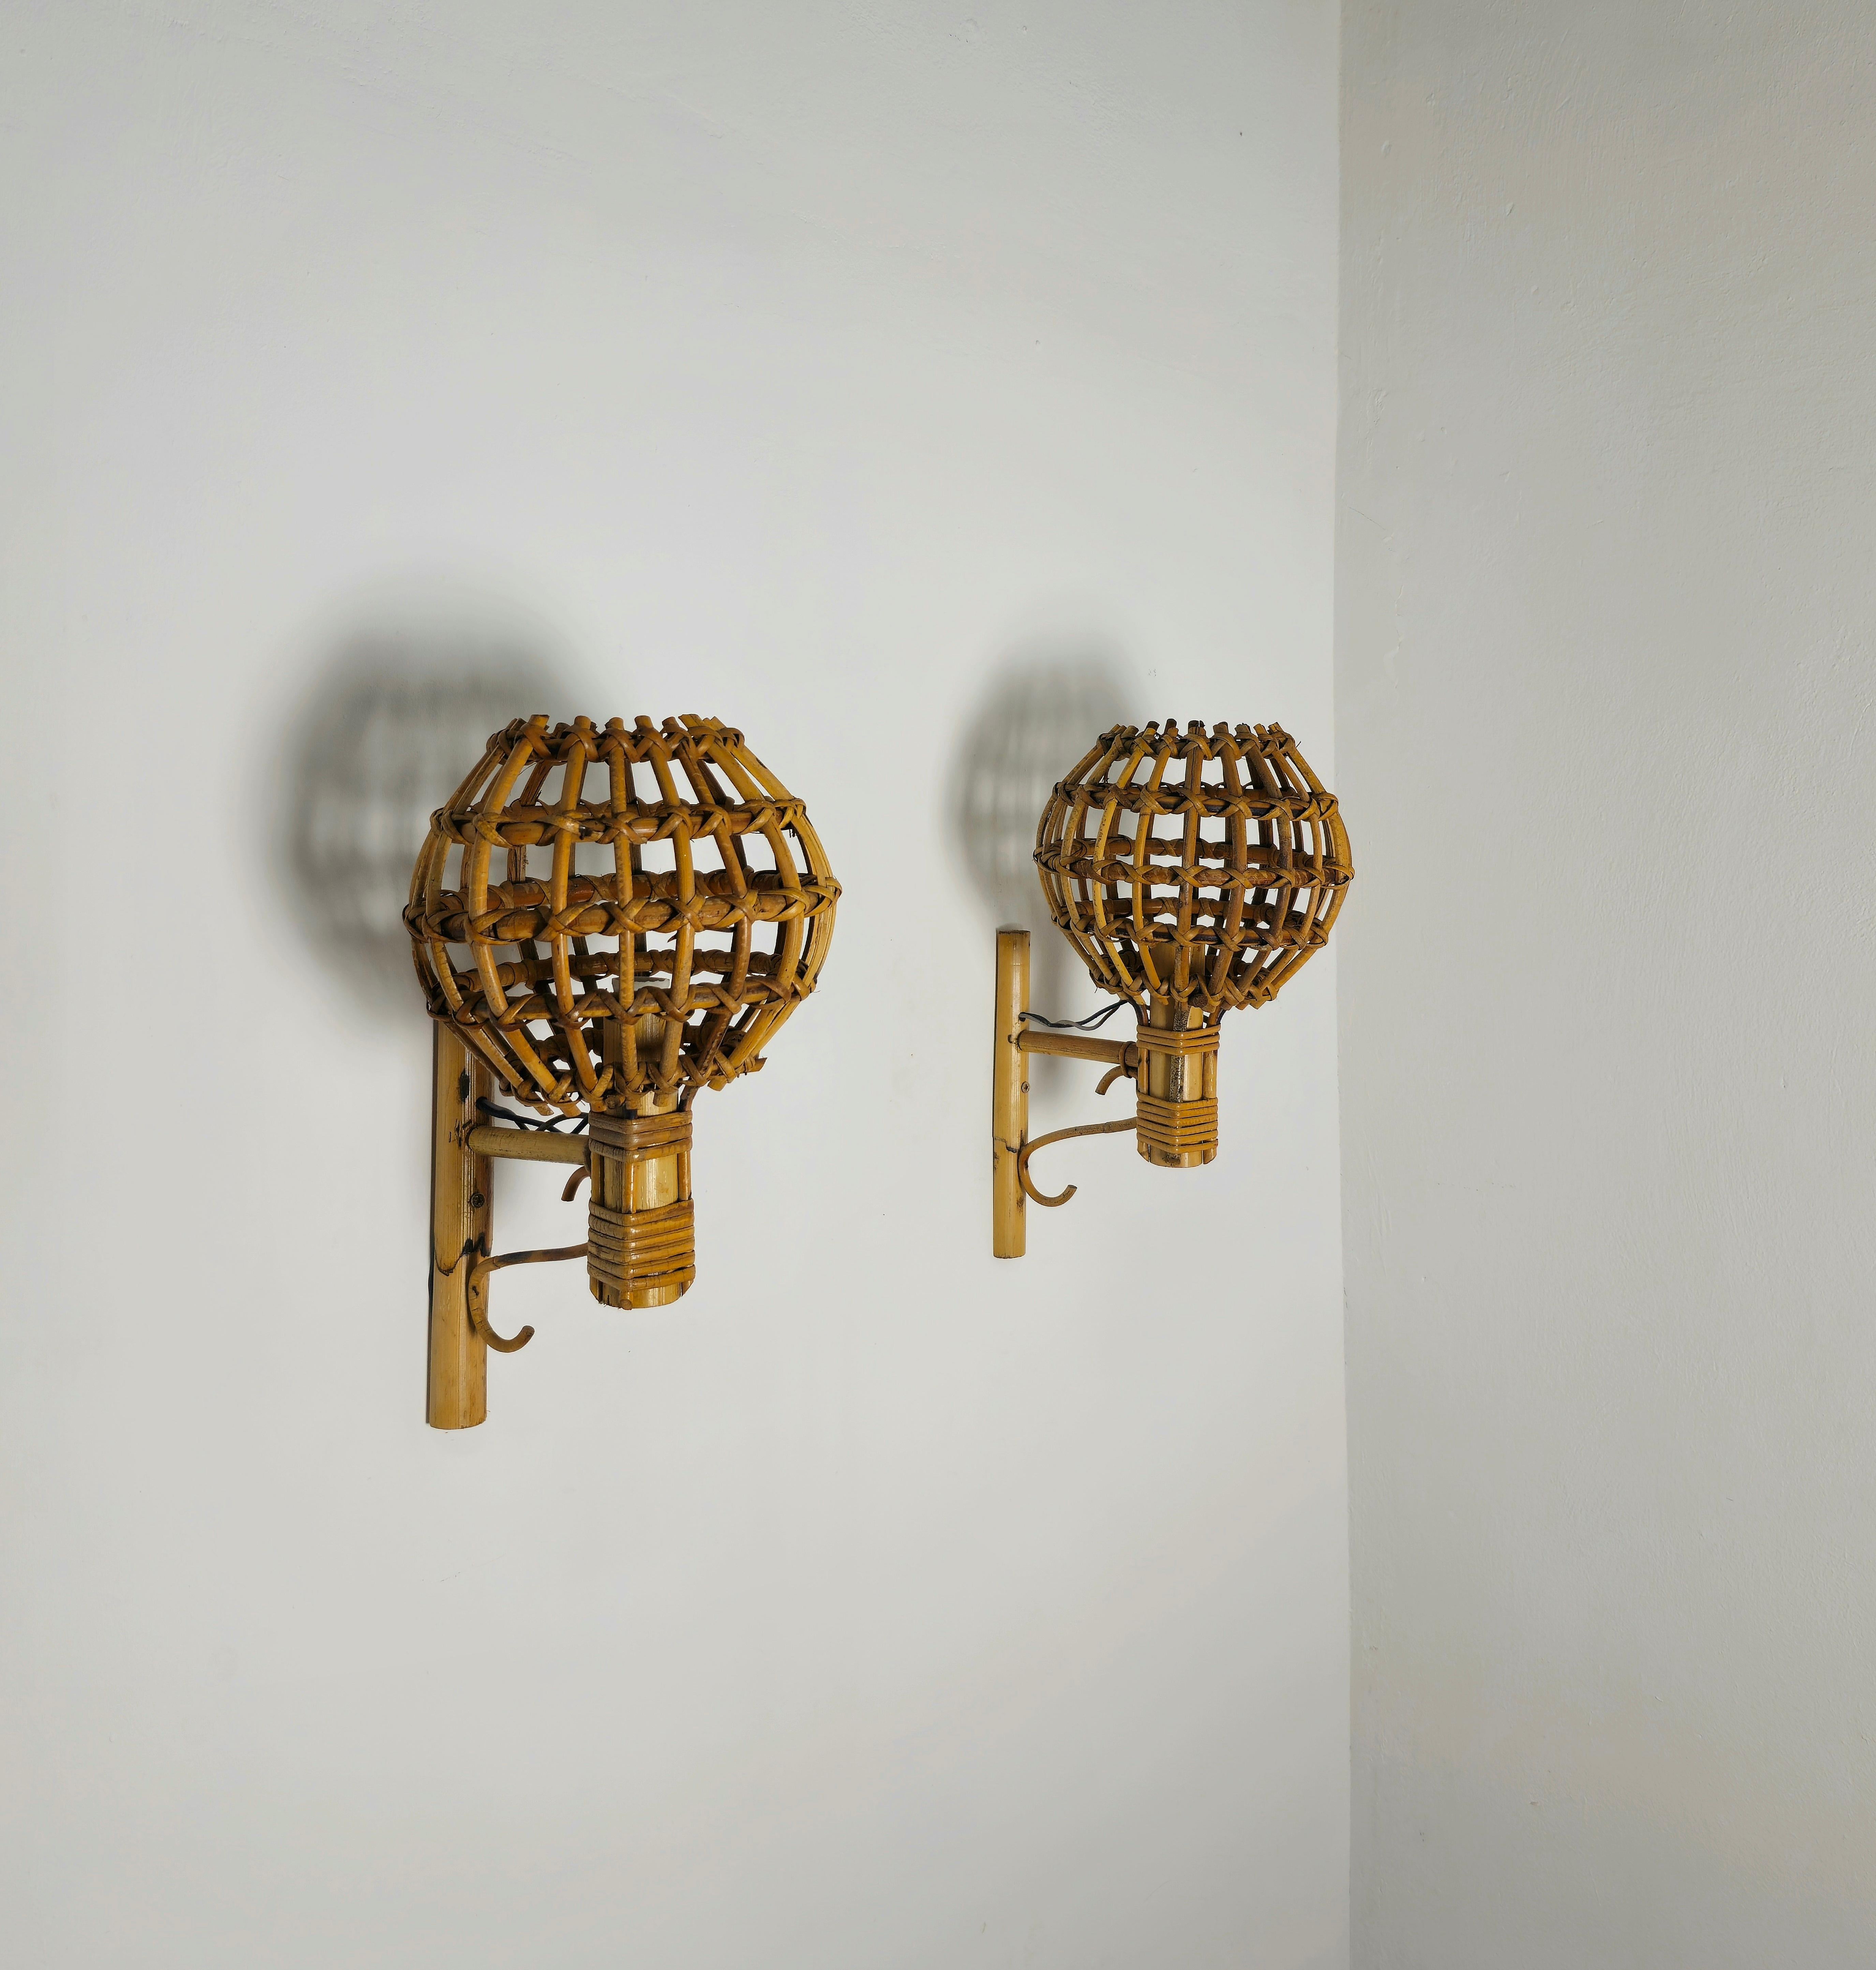 Italian Midcentury Wall Lights Rattan Bamboo Attributed to Louis Sognot 60s Set of 2